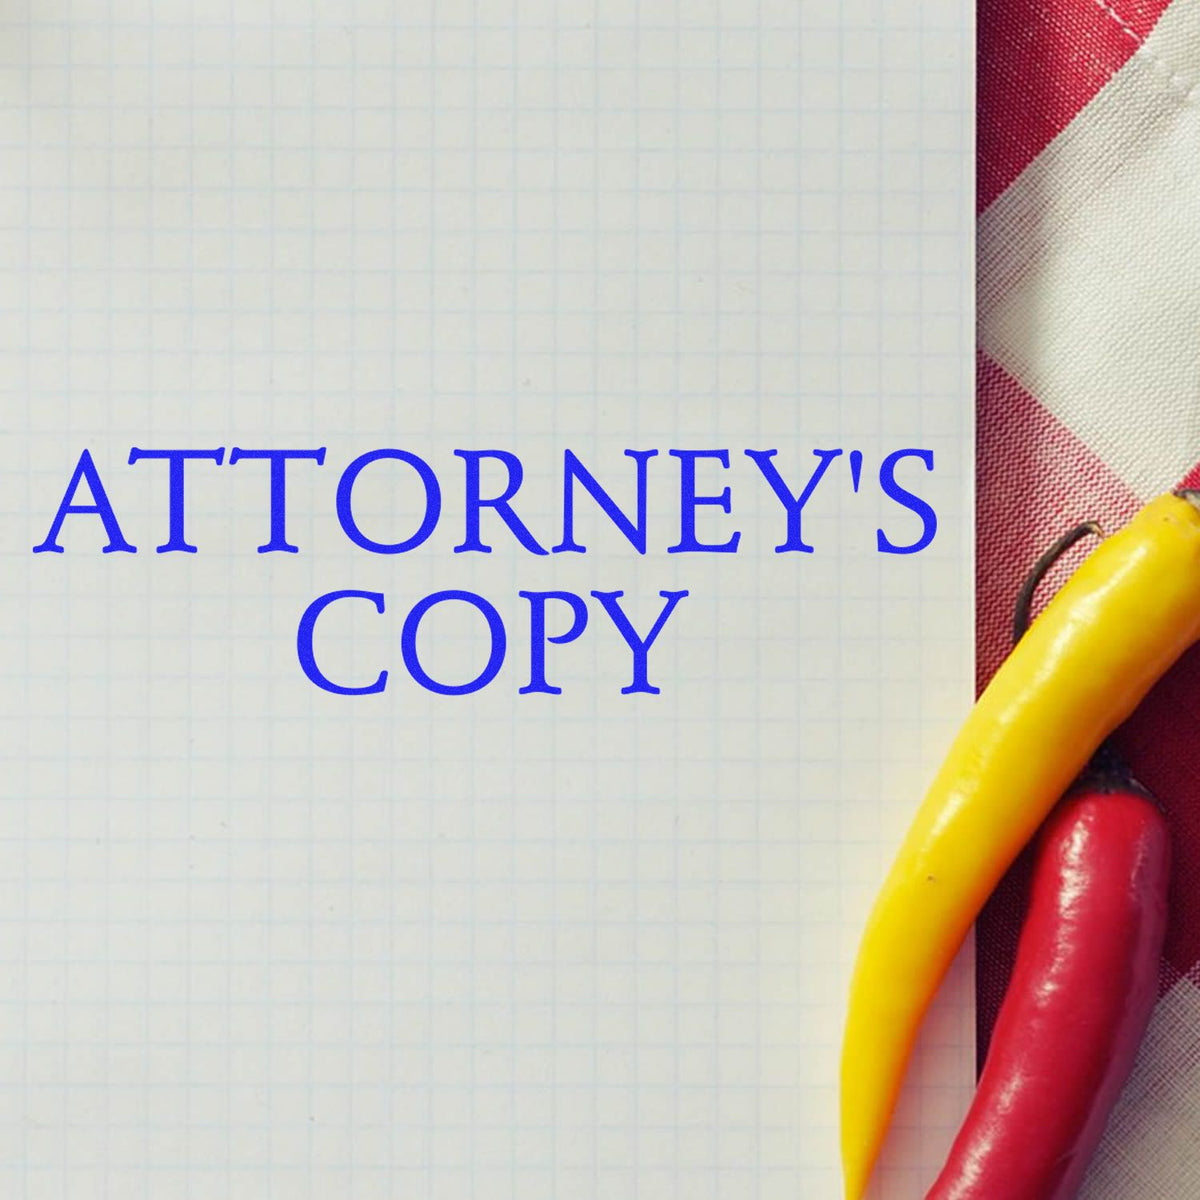 Attorneys Copy Rubber Stamp In Use Photo